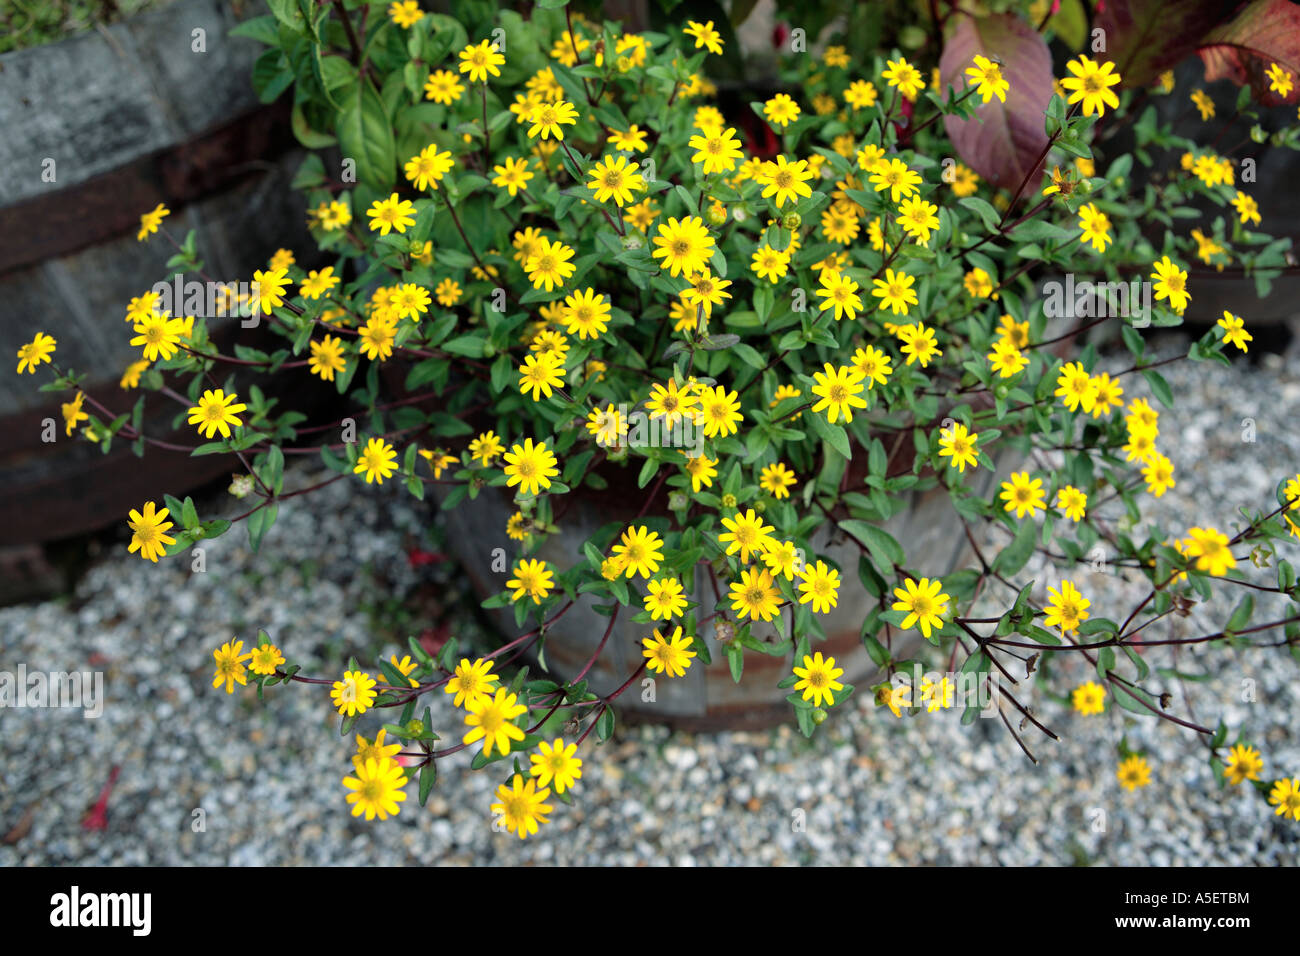 Wooden basket of yellow daisy flowers Stock Photo